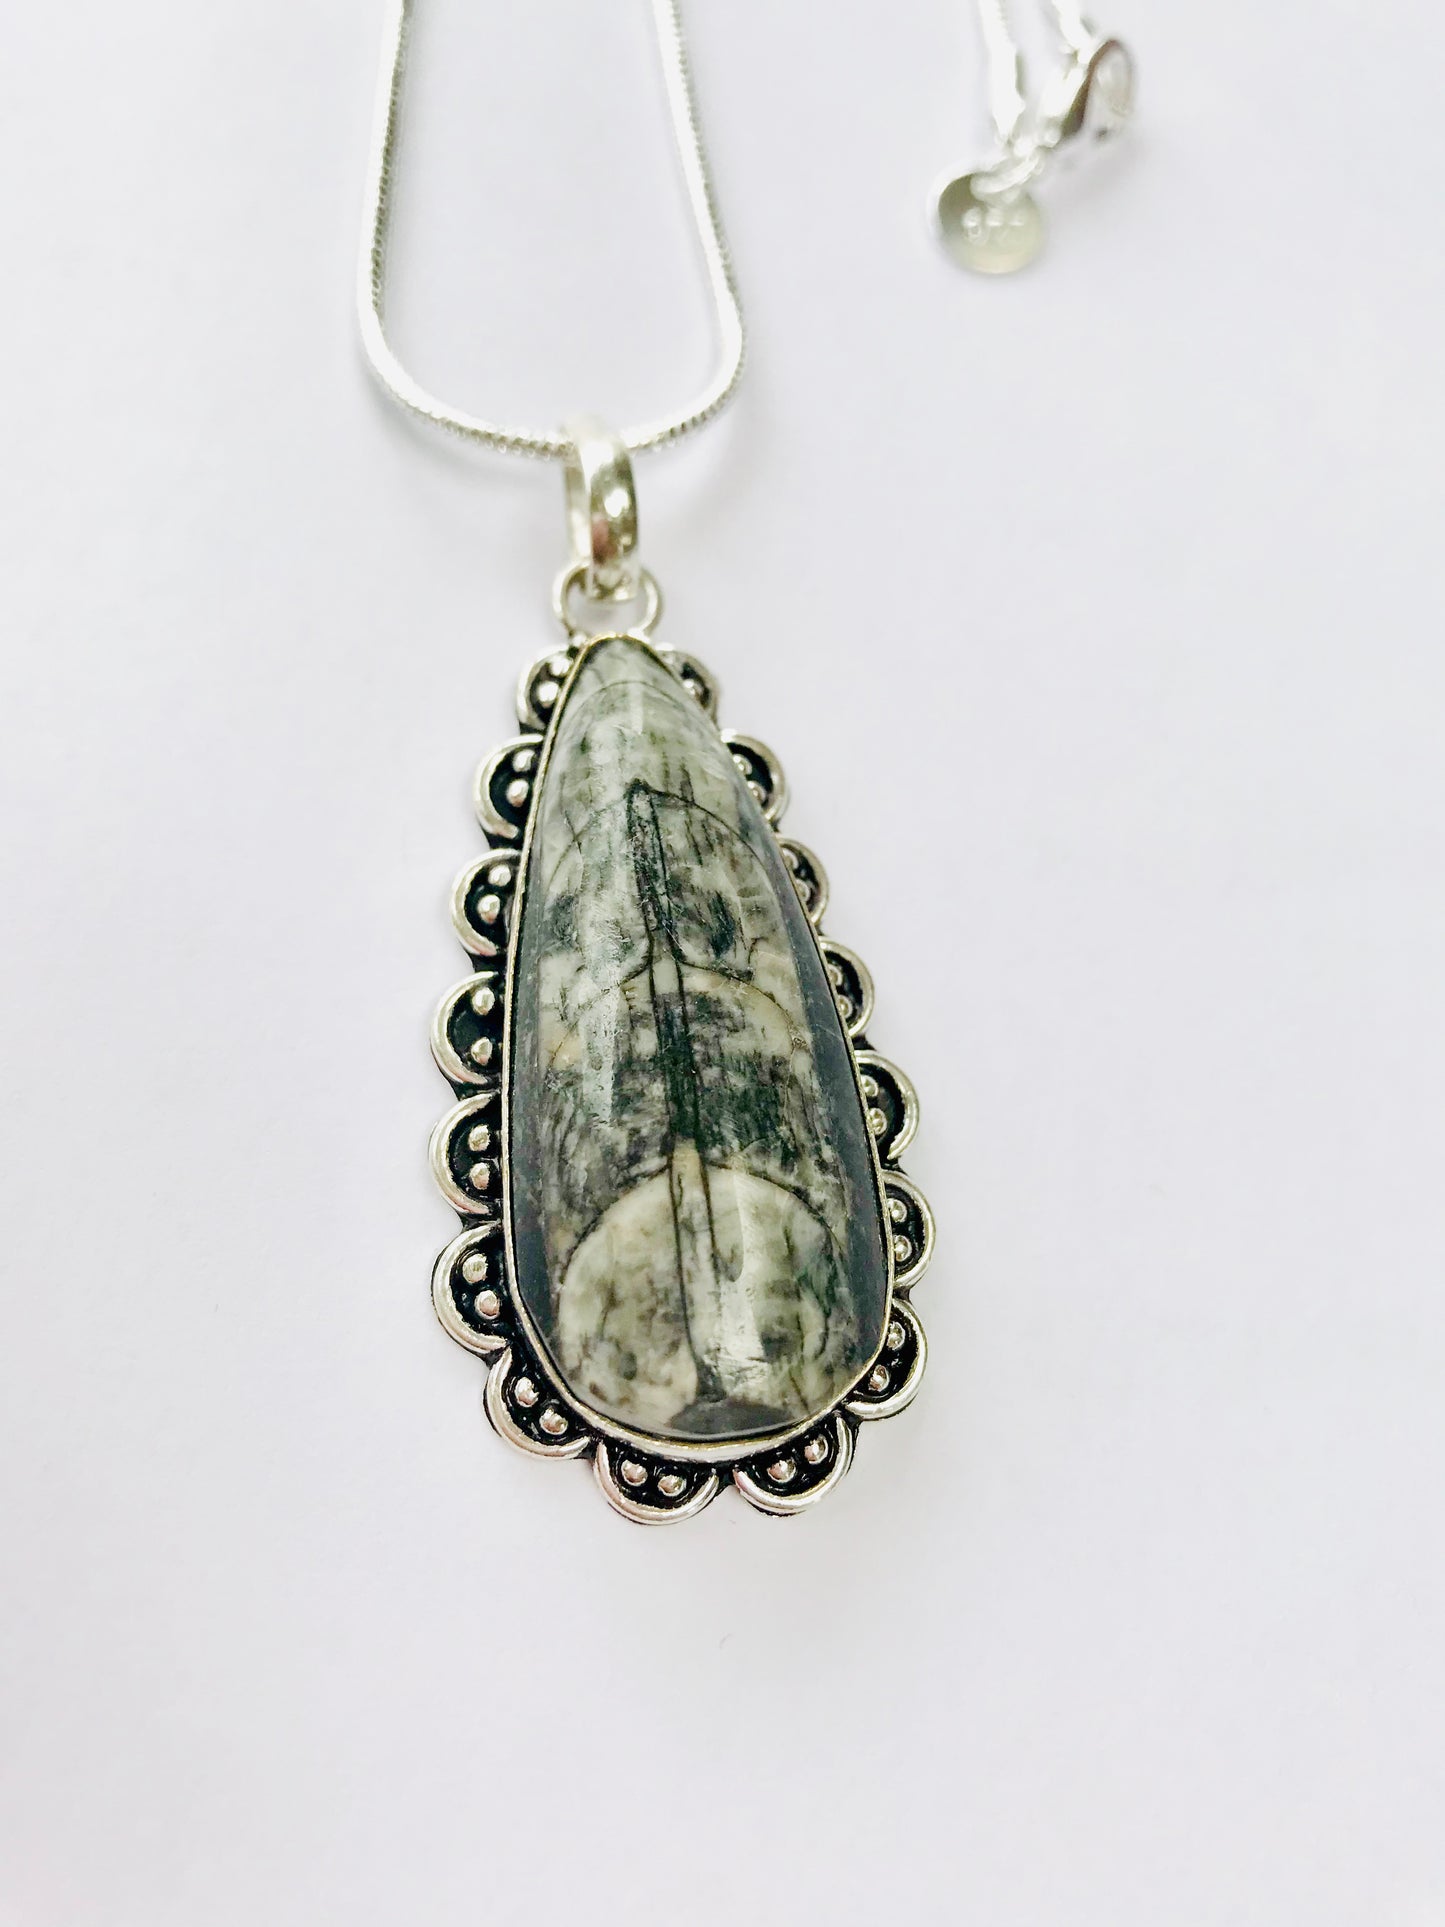 Orthoceras Fossil Pendant & 925 Silver Snake Chain - Reduces Toxins - Crystal Boutique.co.uk